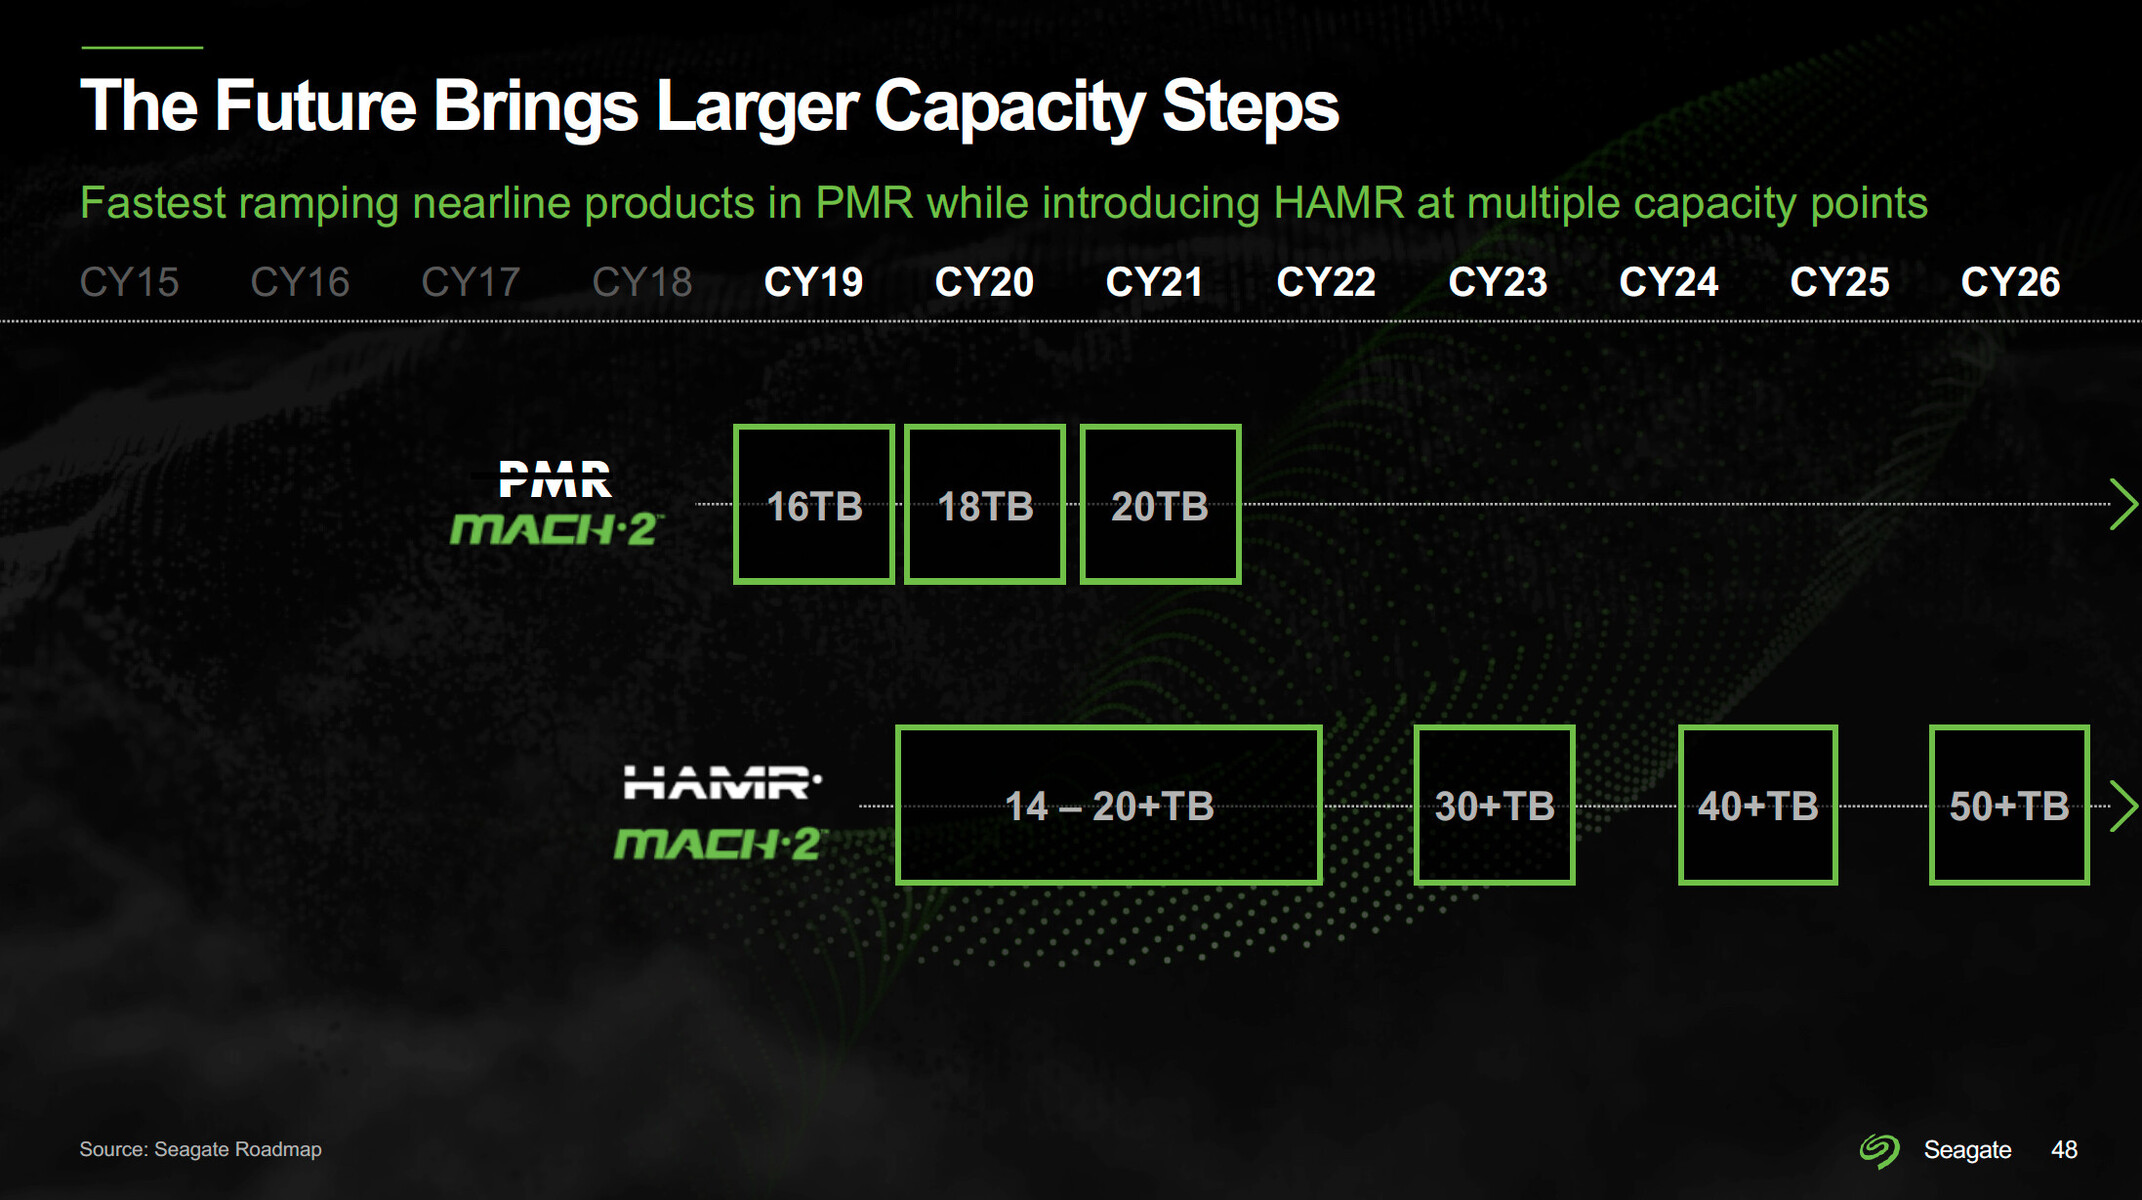 Later this year, Seagate will release HAMR drives with a capacity of 32 TB, and in 2024, they plan to release drives with a capacity of over 40 TB.